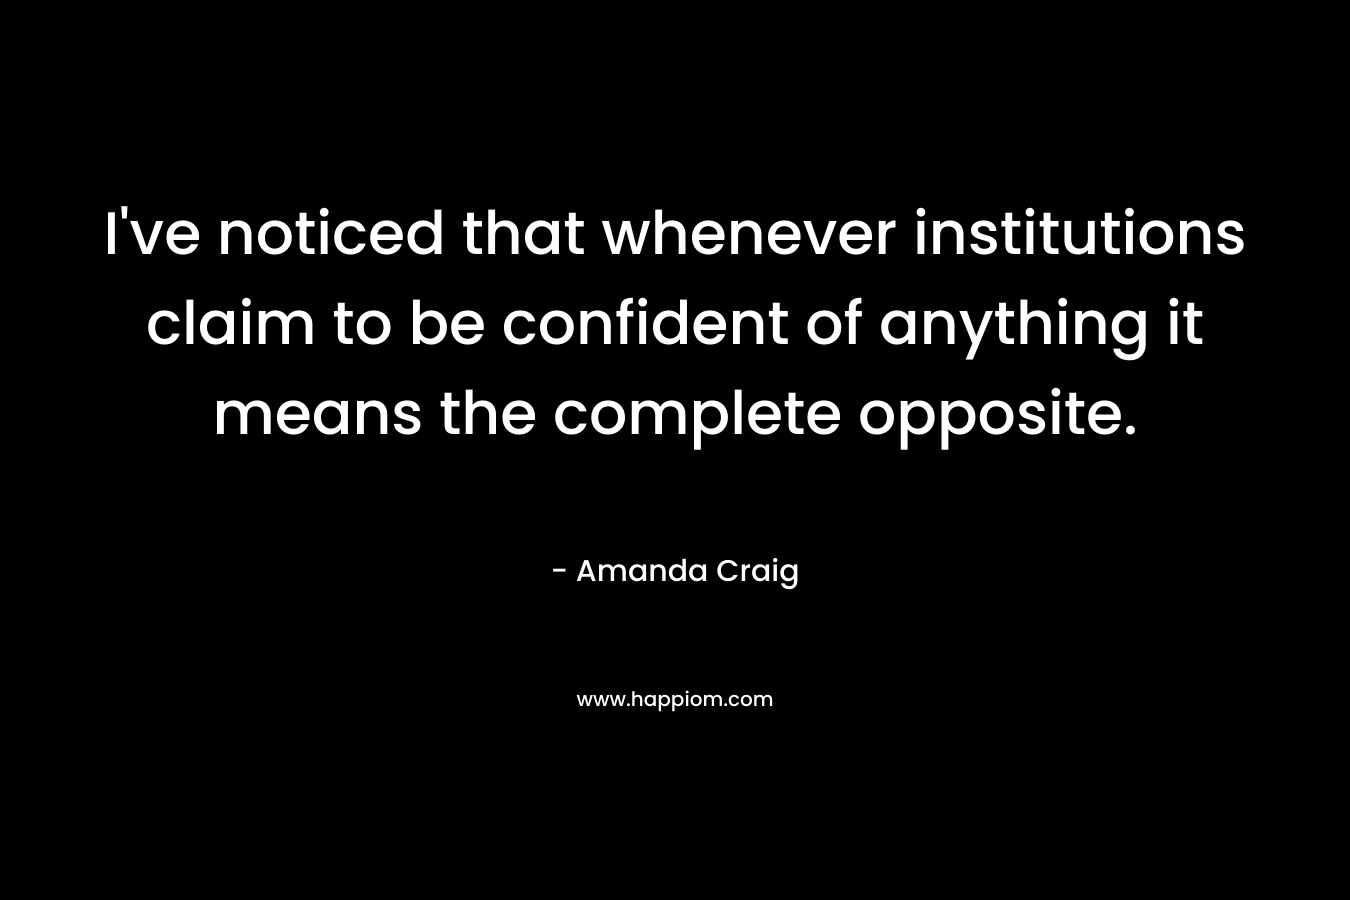 I’ve noticed that whenever institutions claim to be confident of anything it means the complete opposite. – Amanda Craig